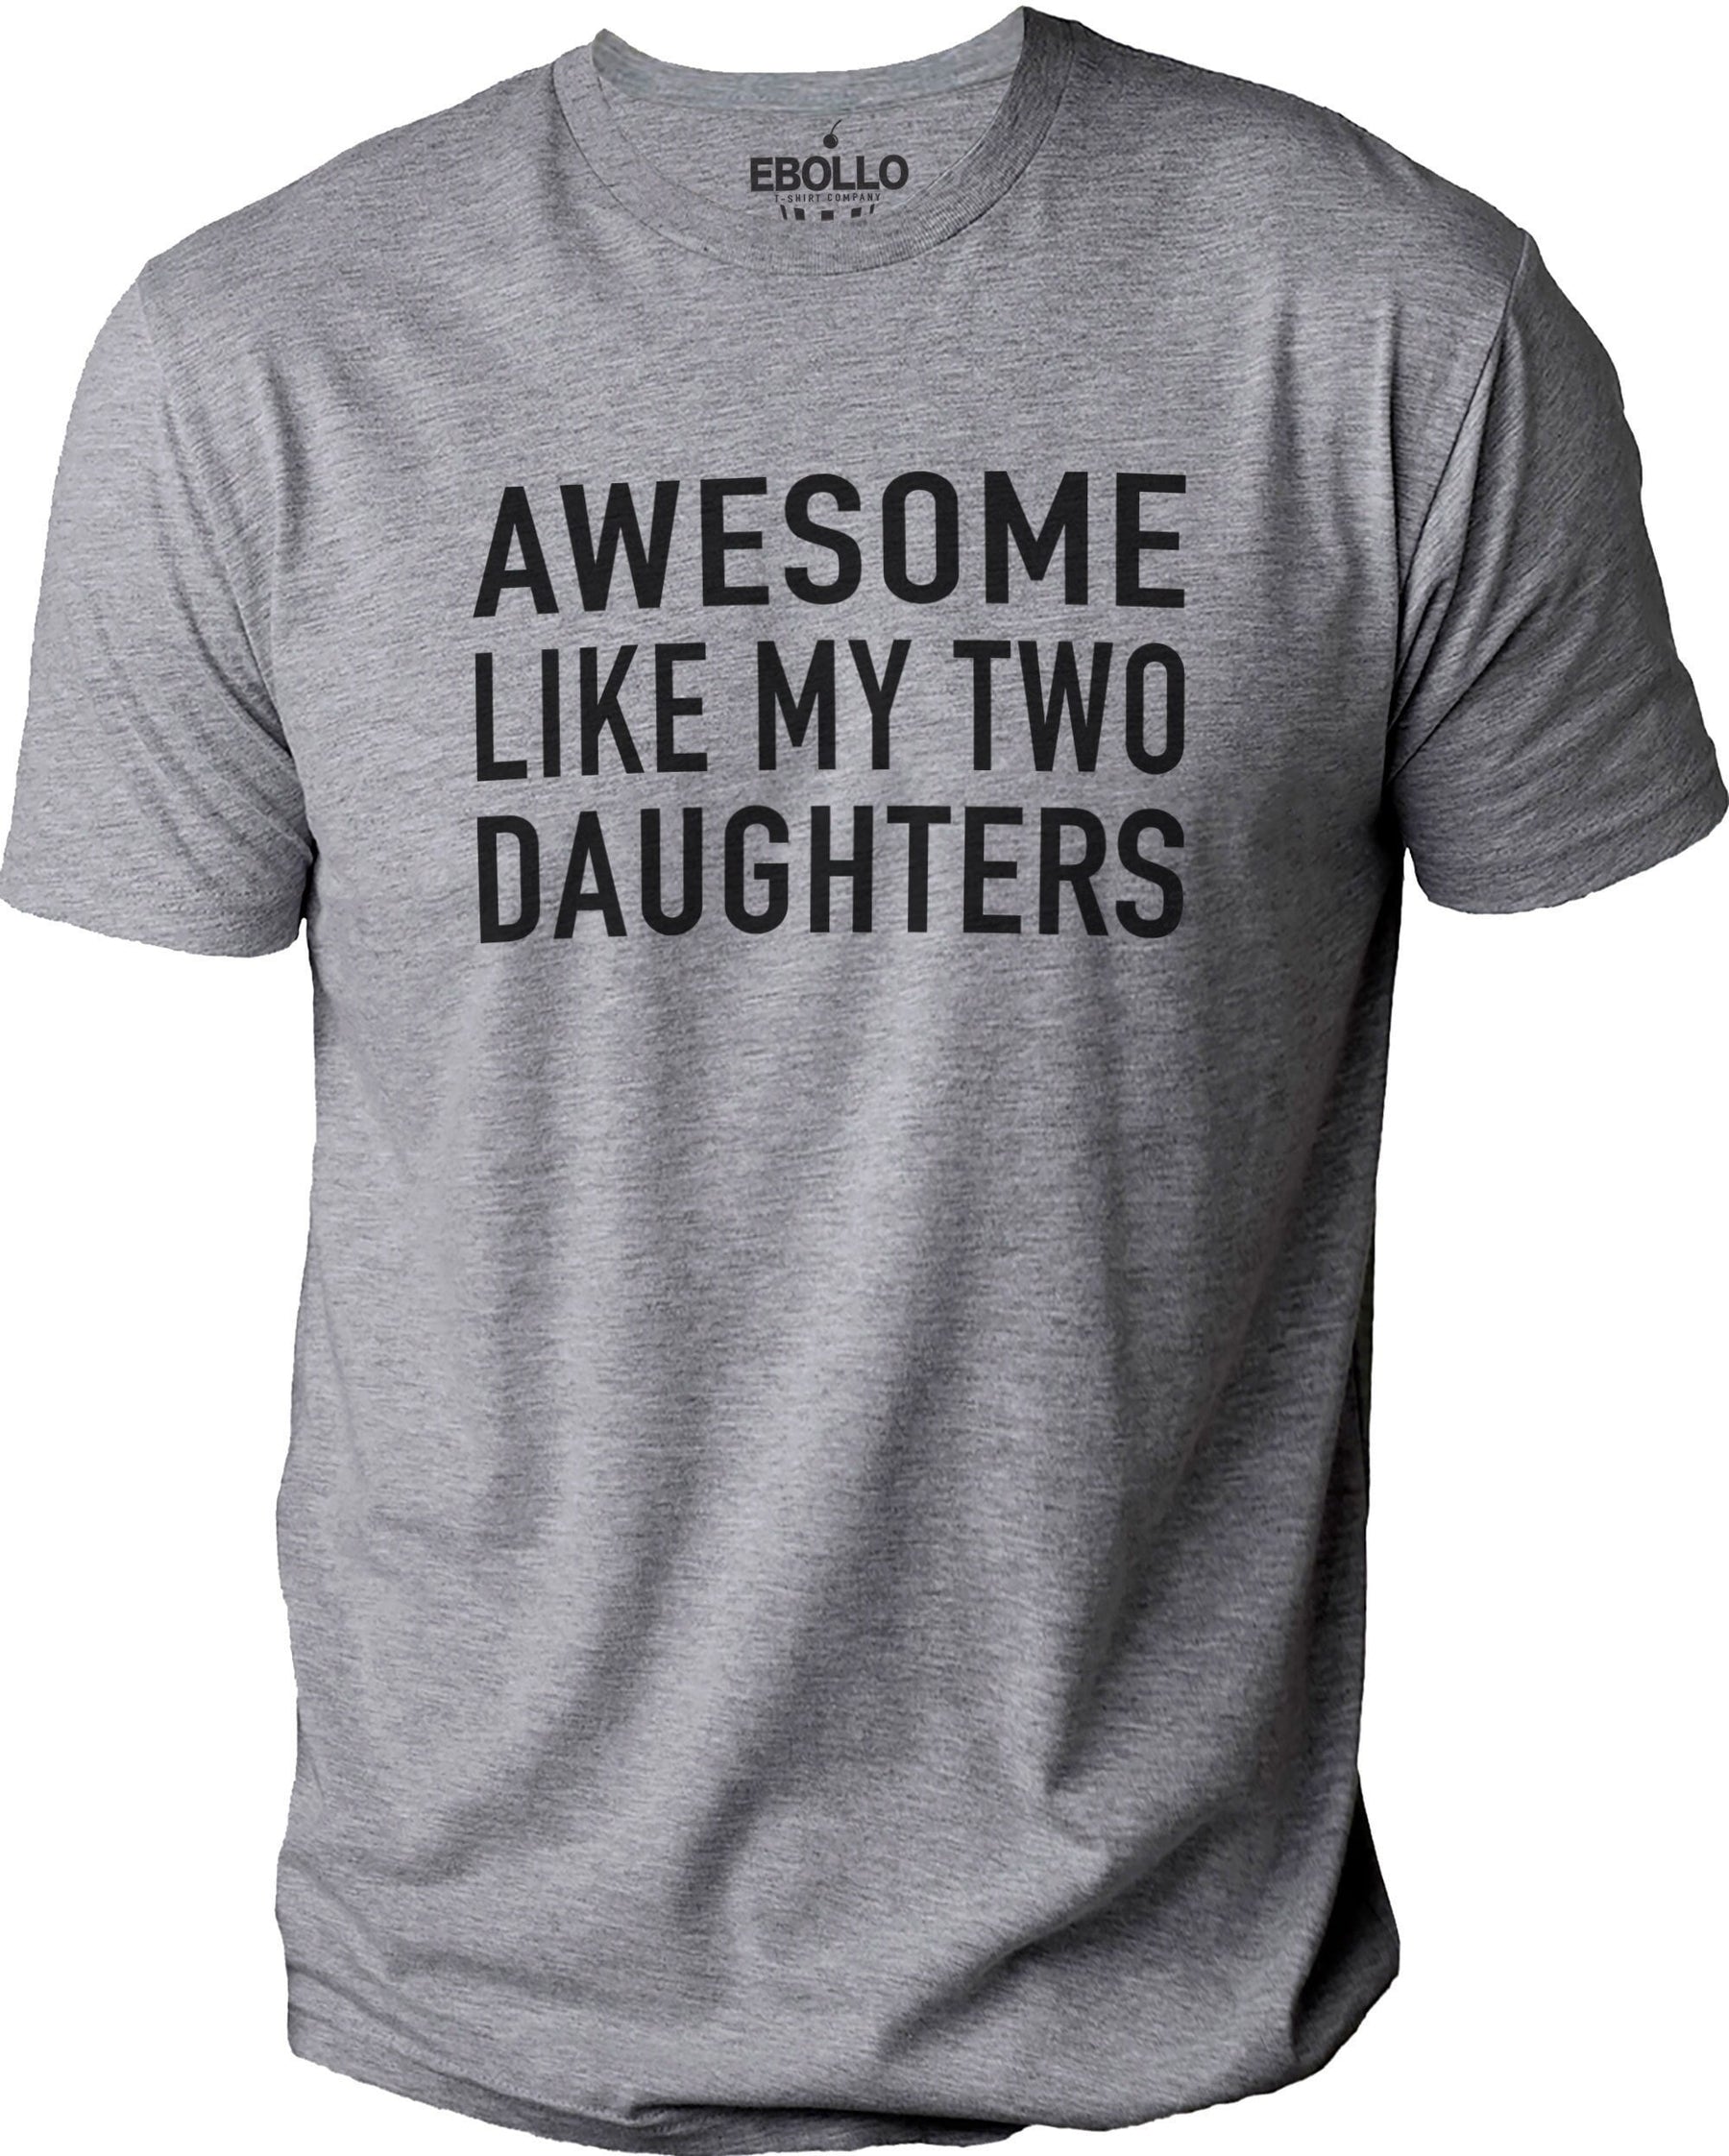 Awesome Like My Two Daughters Shirt, Funny Shirt Men - Fathers day Gift -  Gift from Daughter - Dad Shirt - Husband Gift, Funny Gift for Dad